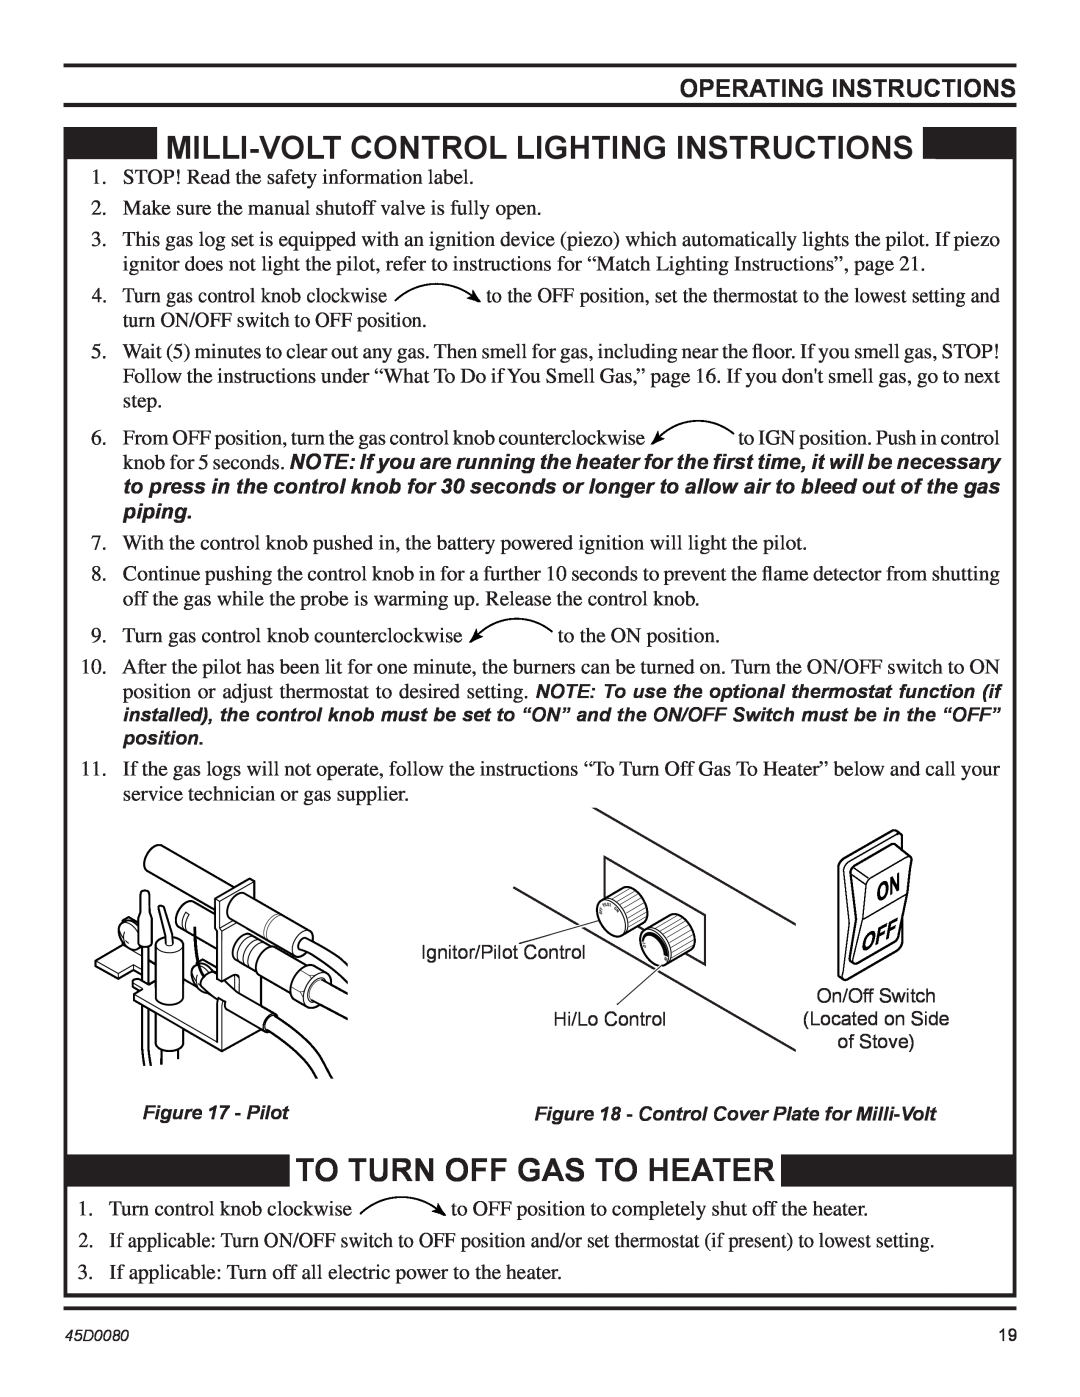 Monessen Hearth C2803VF manual Milli-Voltcontrol Lighting Instructions, To Turn Off Gas To Heater, Operating Instructions 